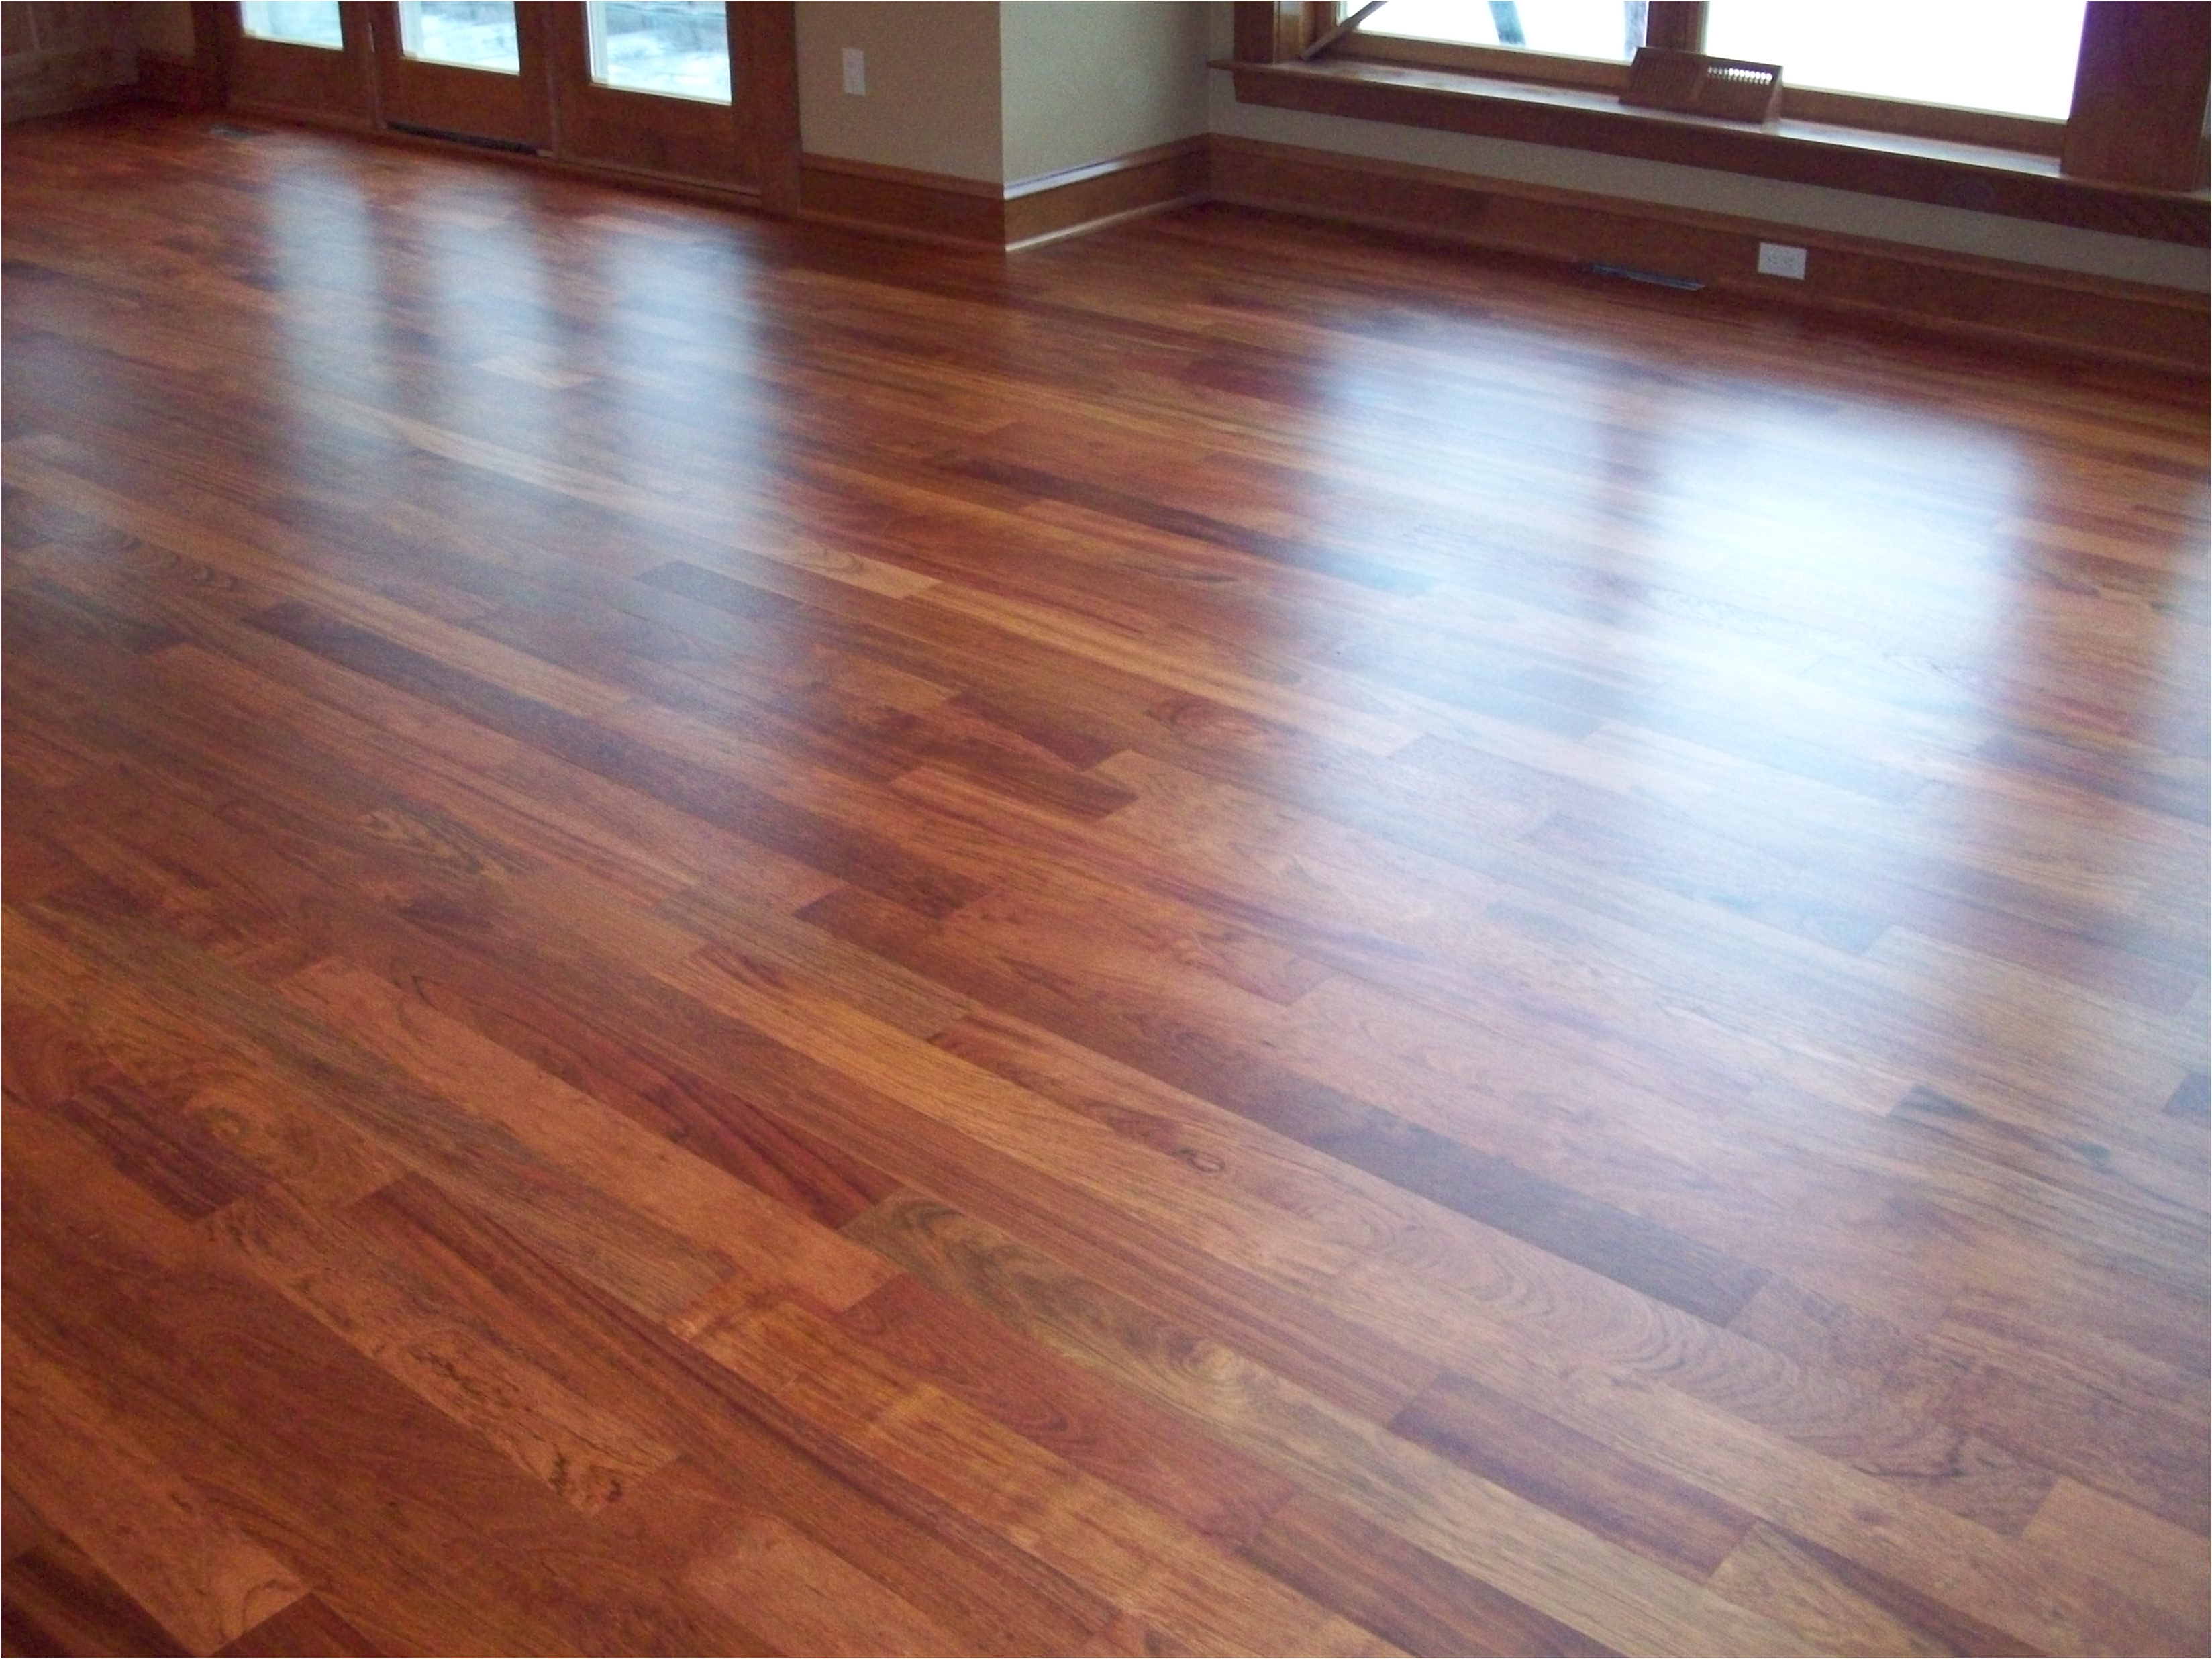 full size of bedroom fascinating discount hardwood flooring 12 8236915 discount hardwood flooring near me